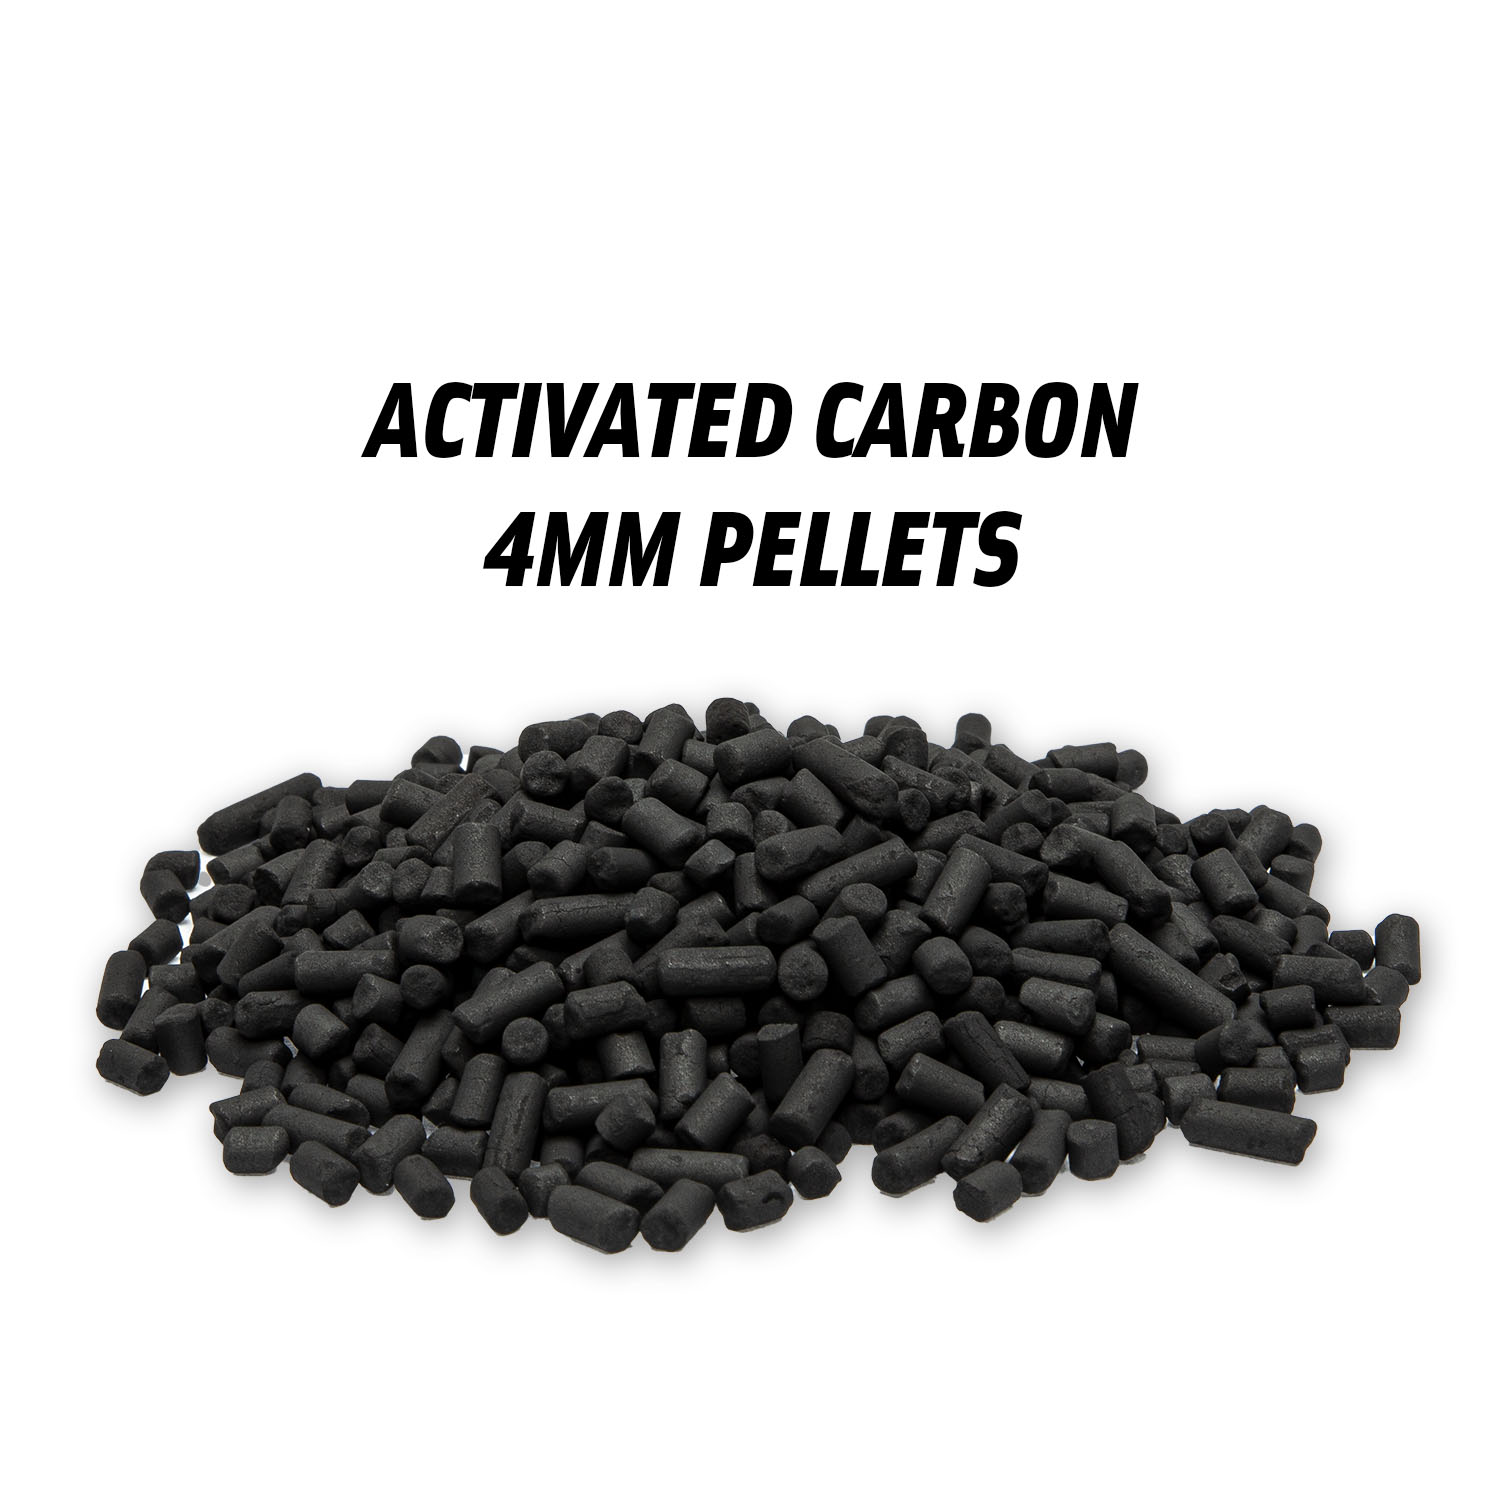 Bulk 4mm Pellet Activated Carbon Impregnated with Ki, KOH, Naoh Is